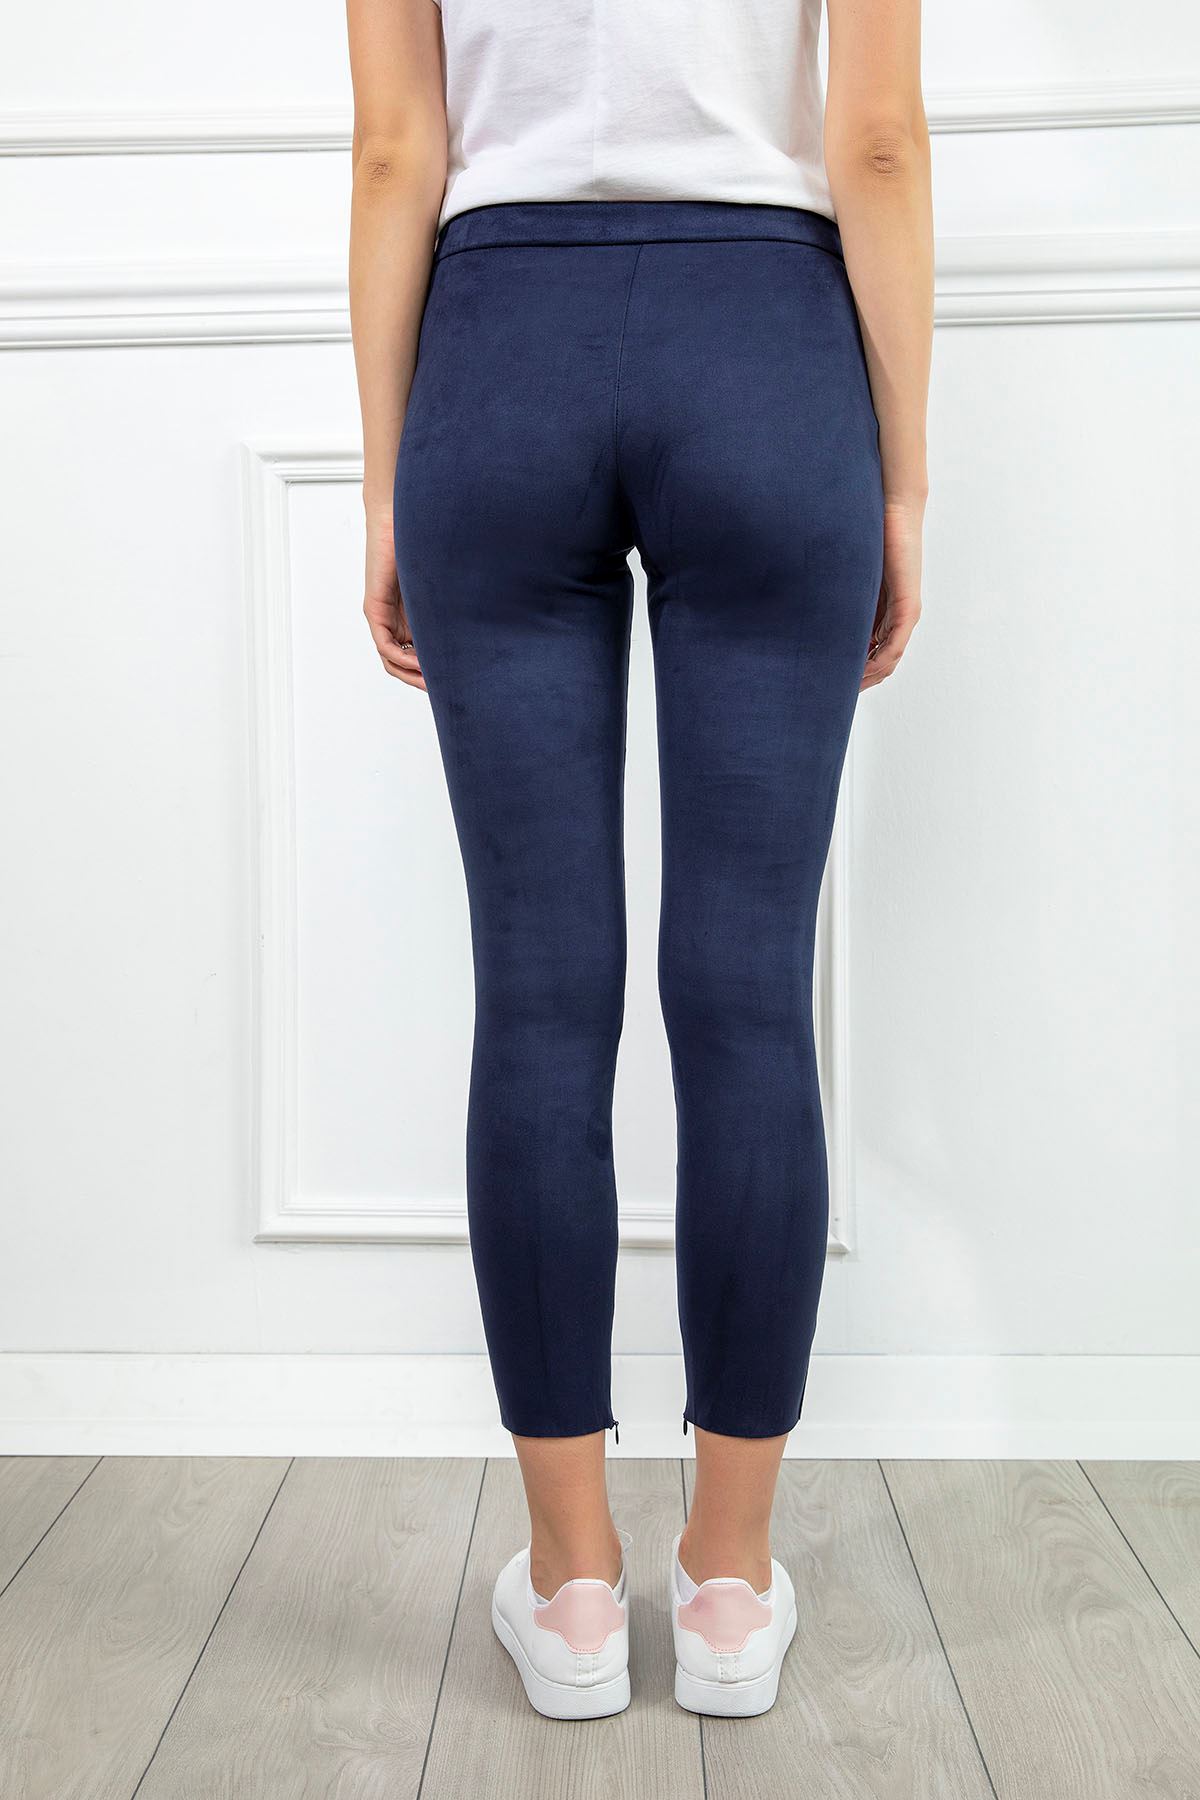 Suede Fabric Ankle Length Zip Women Tights - Navy Blue 